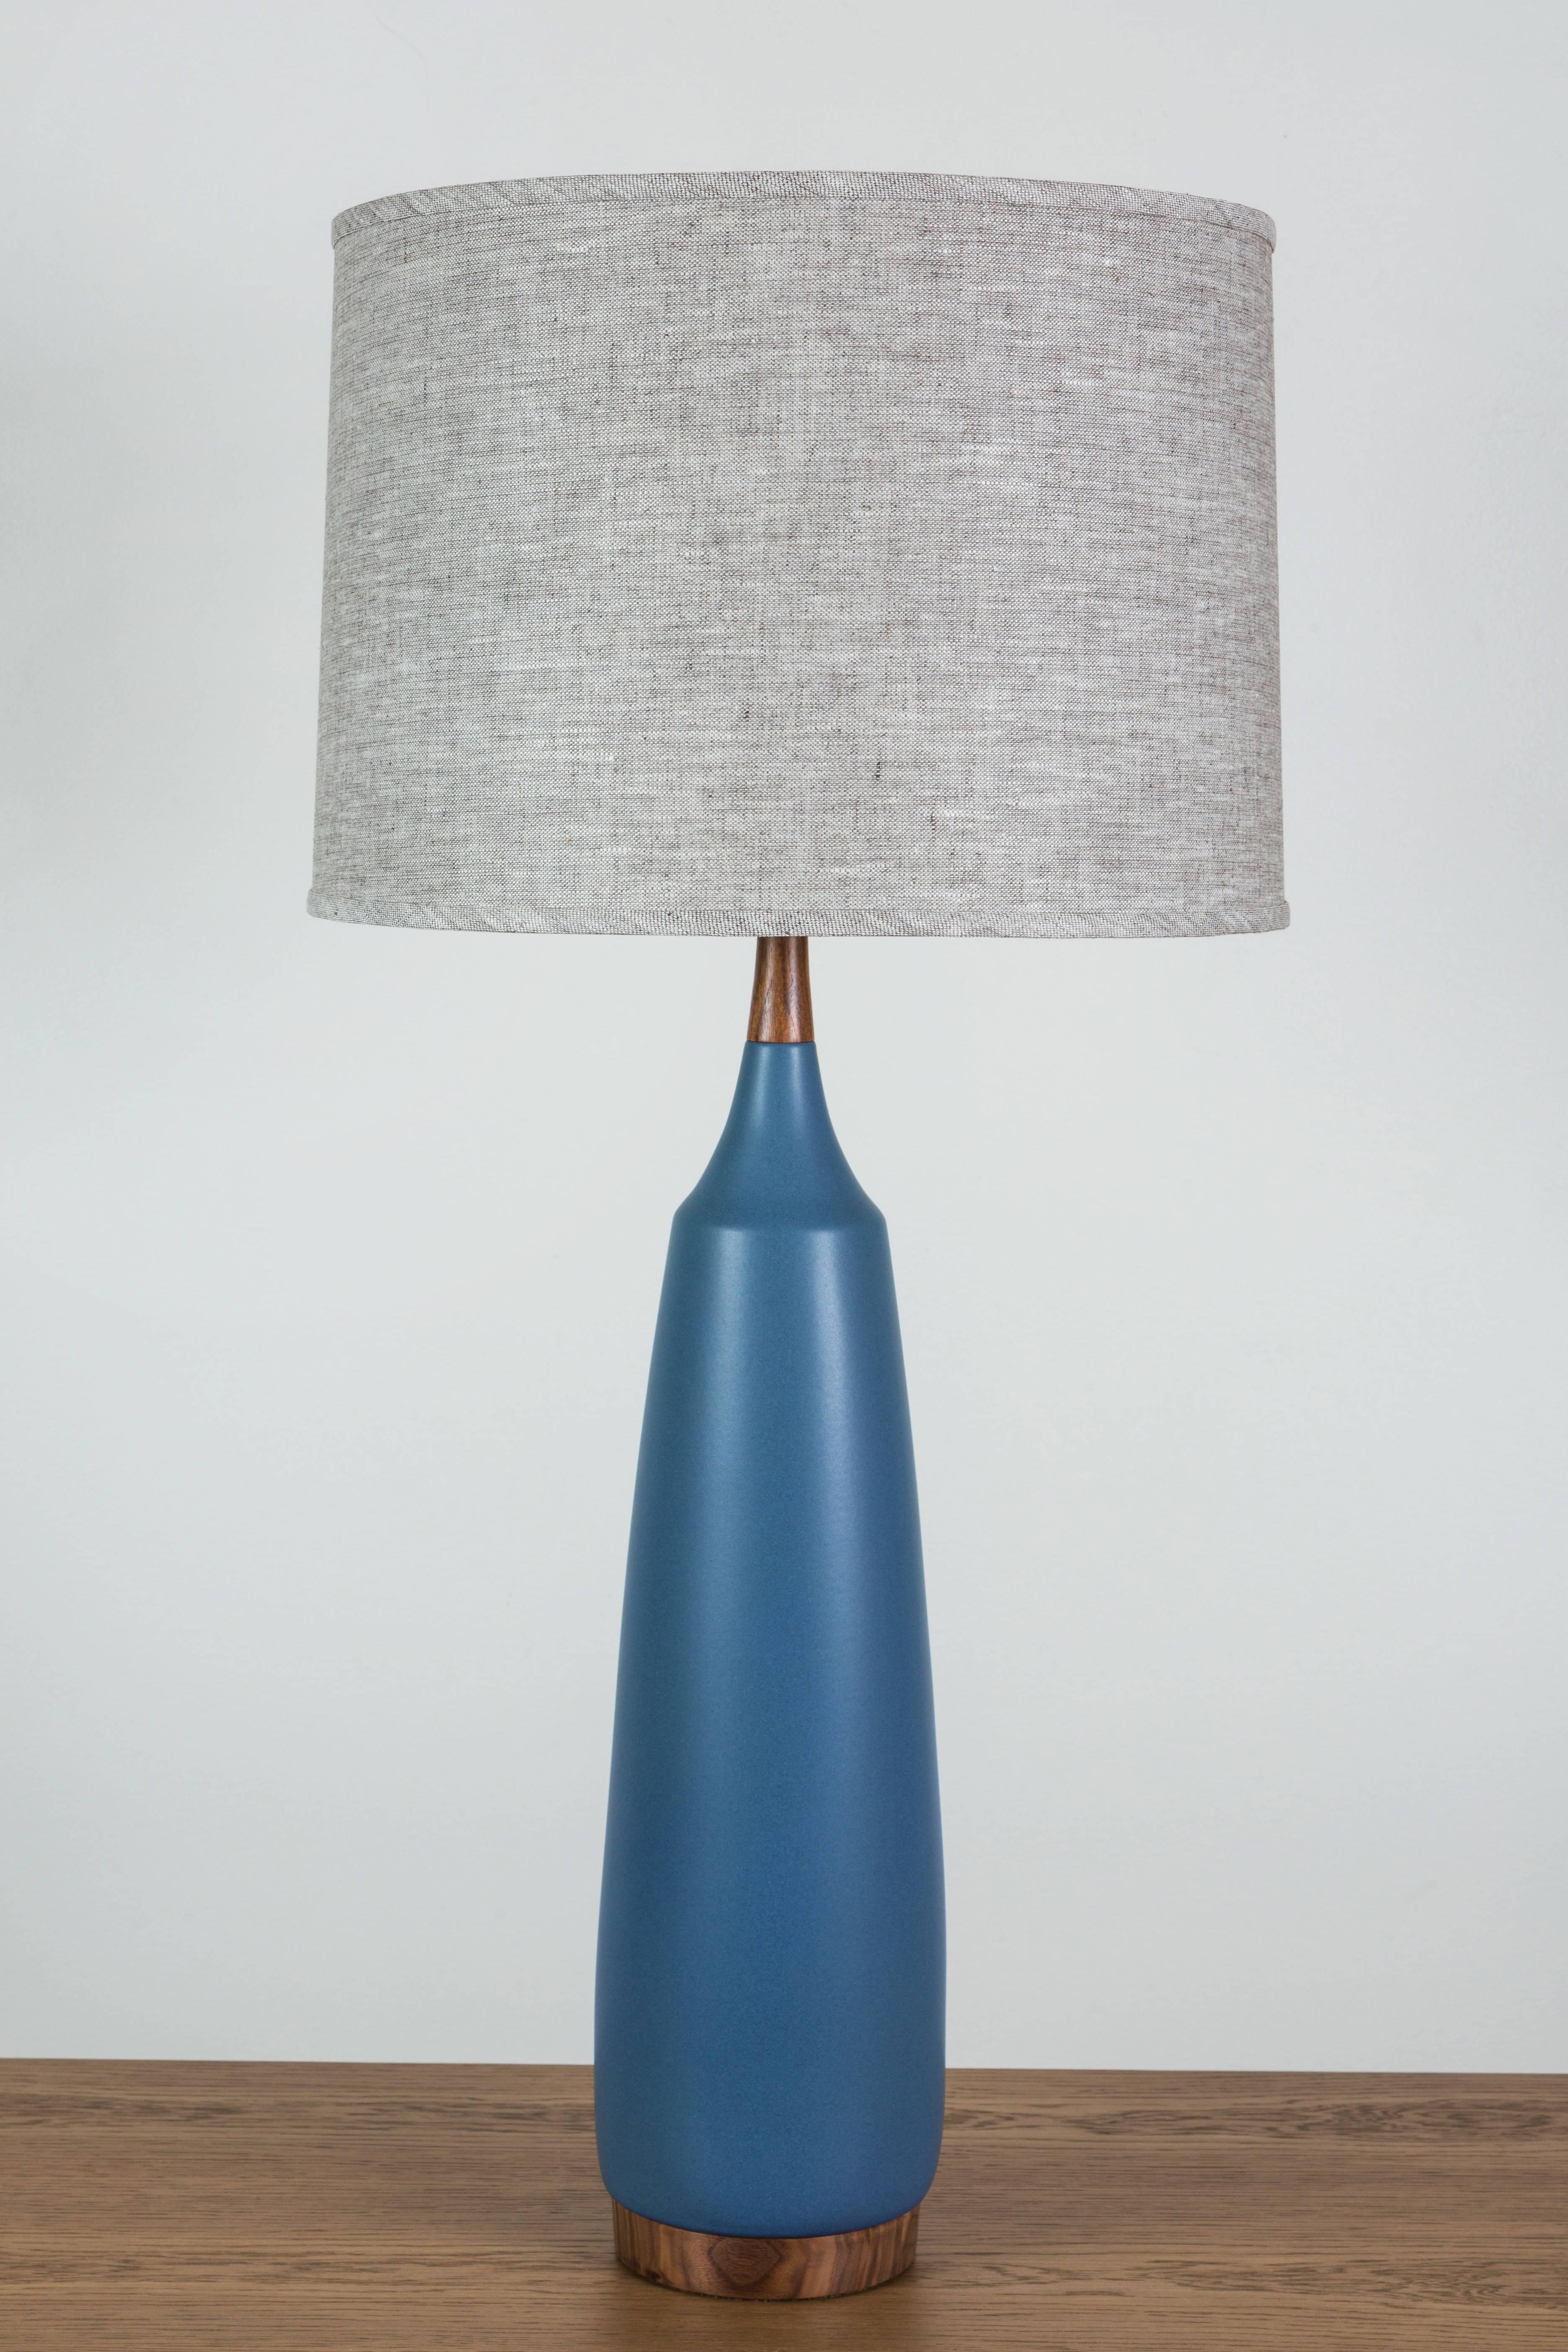 Pair of Laurel lamps by Stone and Sawyer for Lawson-Fenning